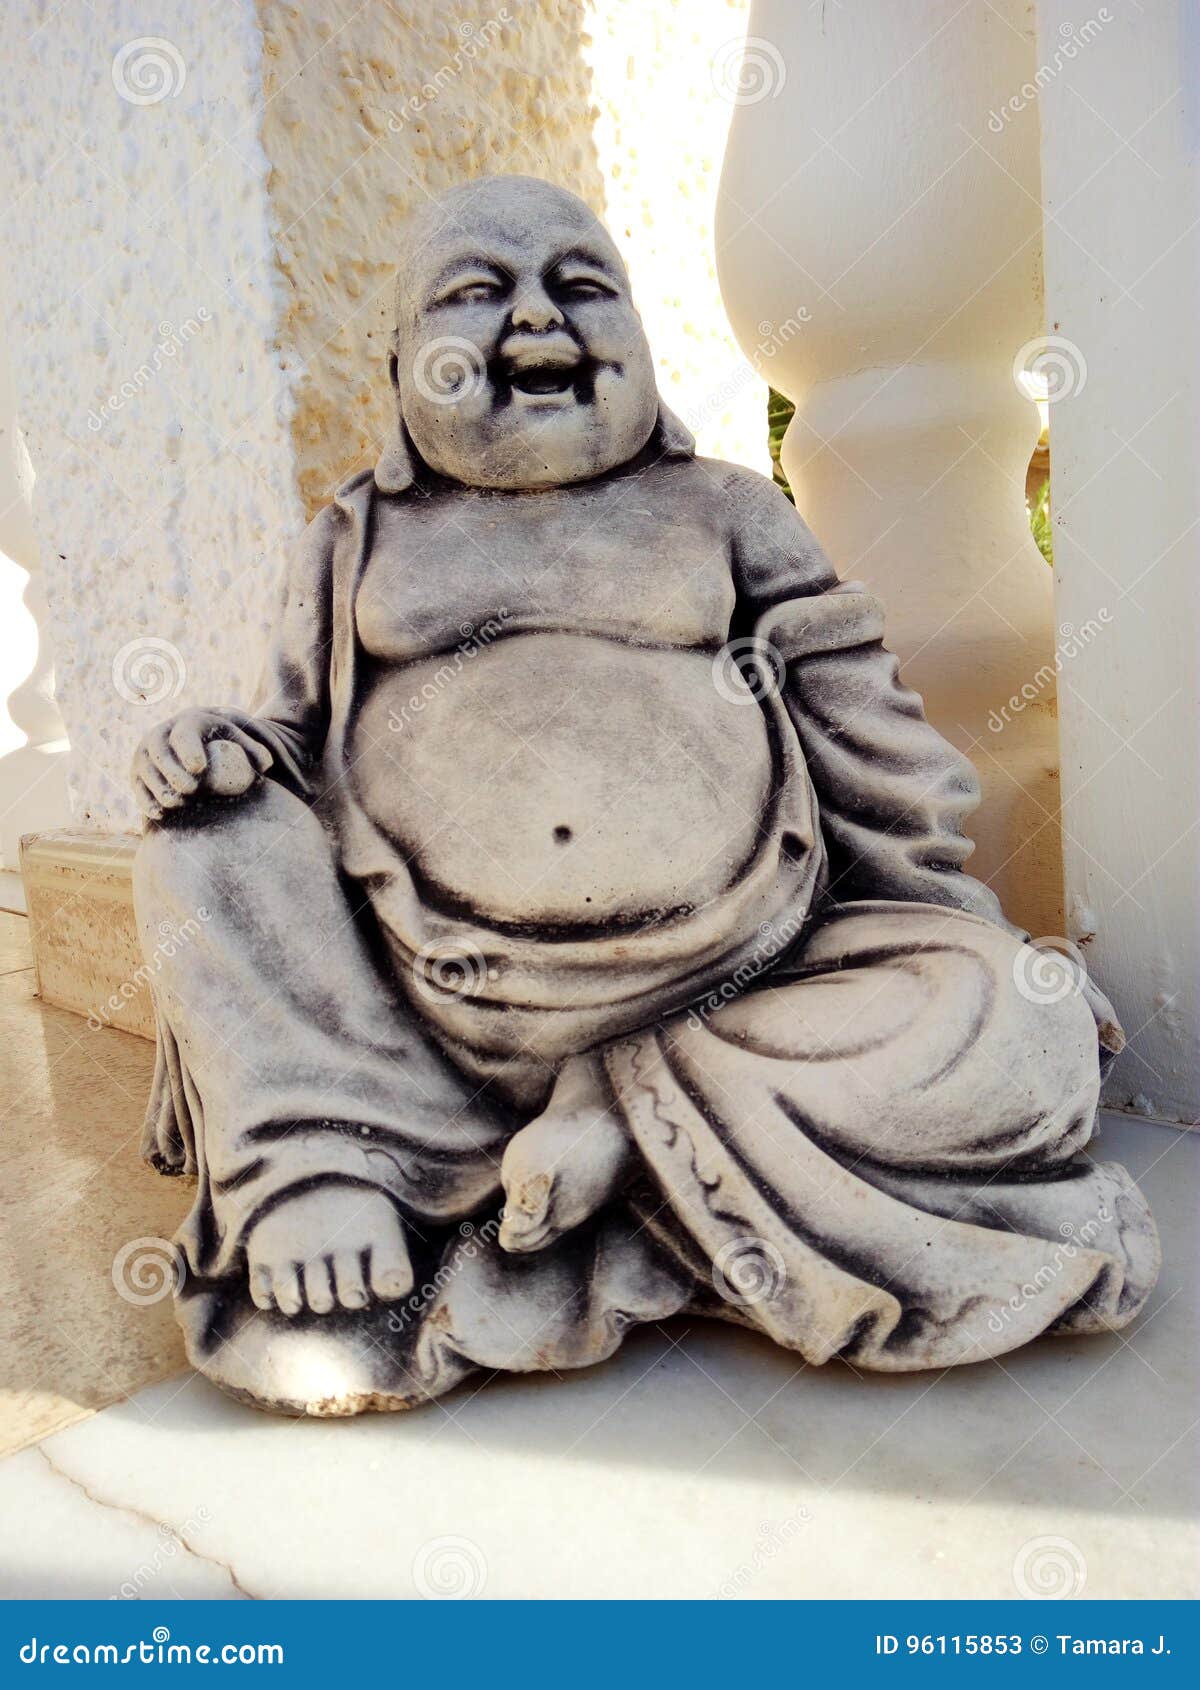 Laughing Buddha statue stock image. Image of sculpture - 96115853